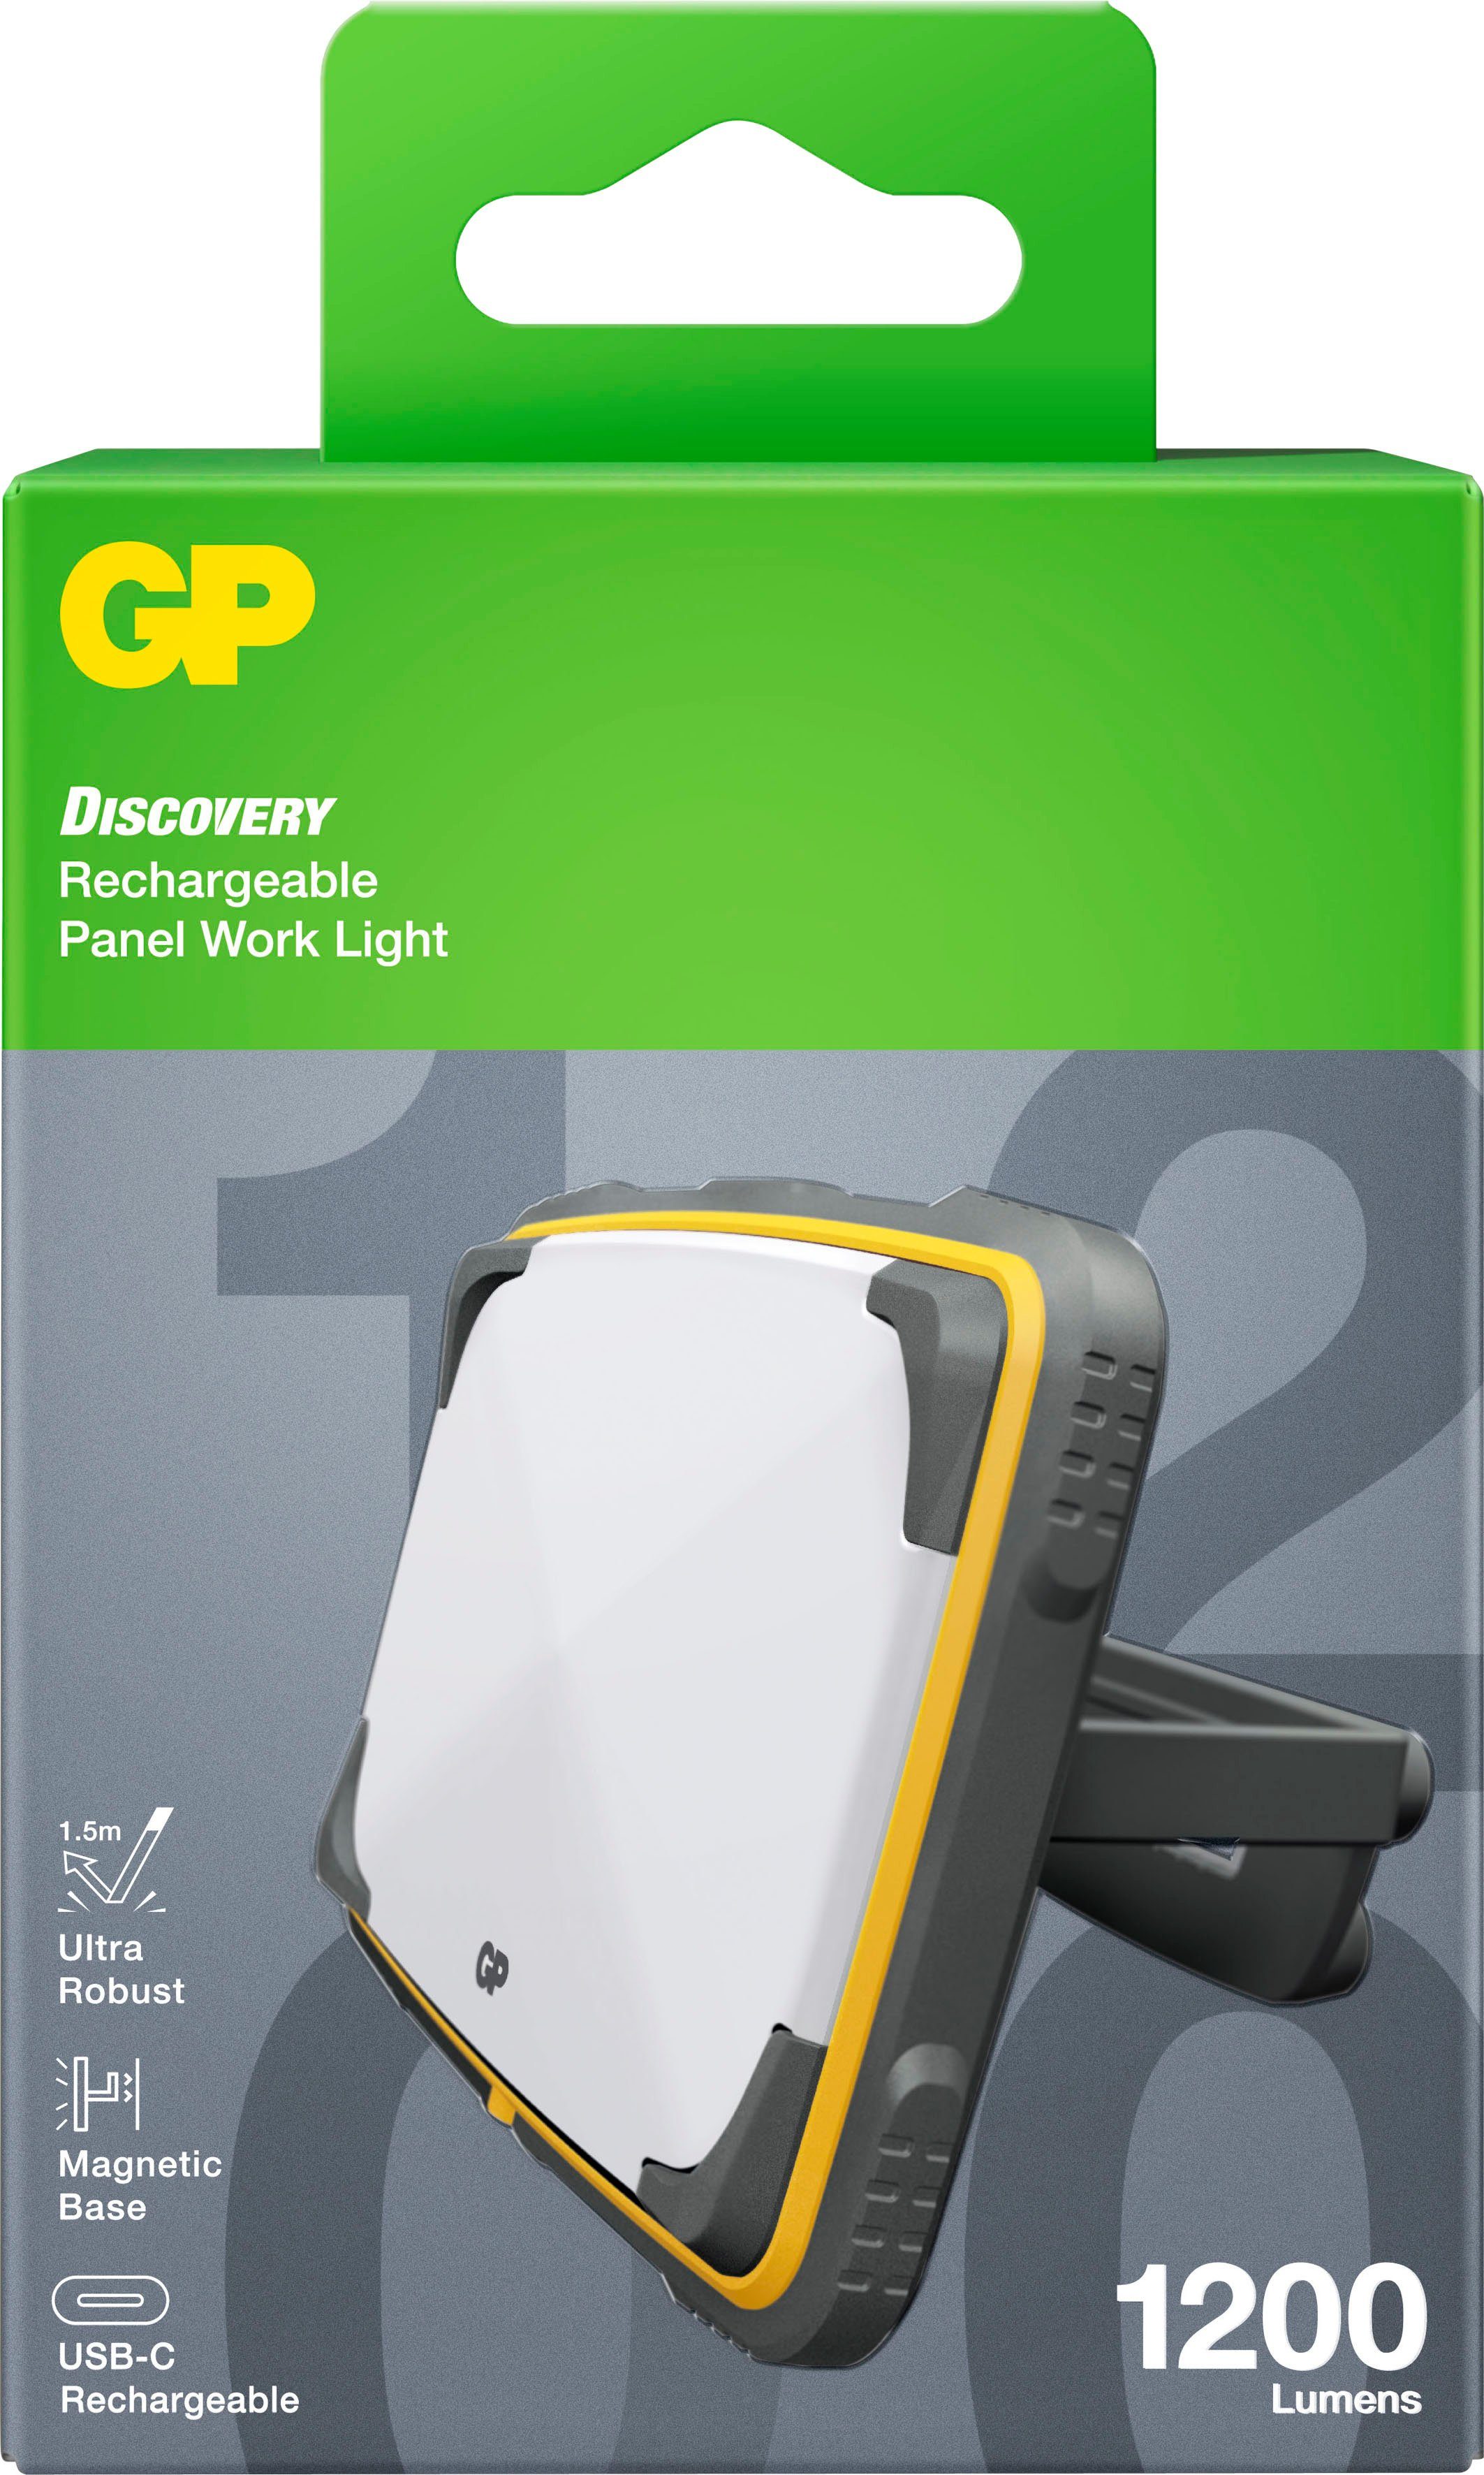 GP Batteries Taschenlampe Arbeitslampe Discovery CWP15